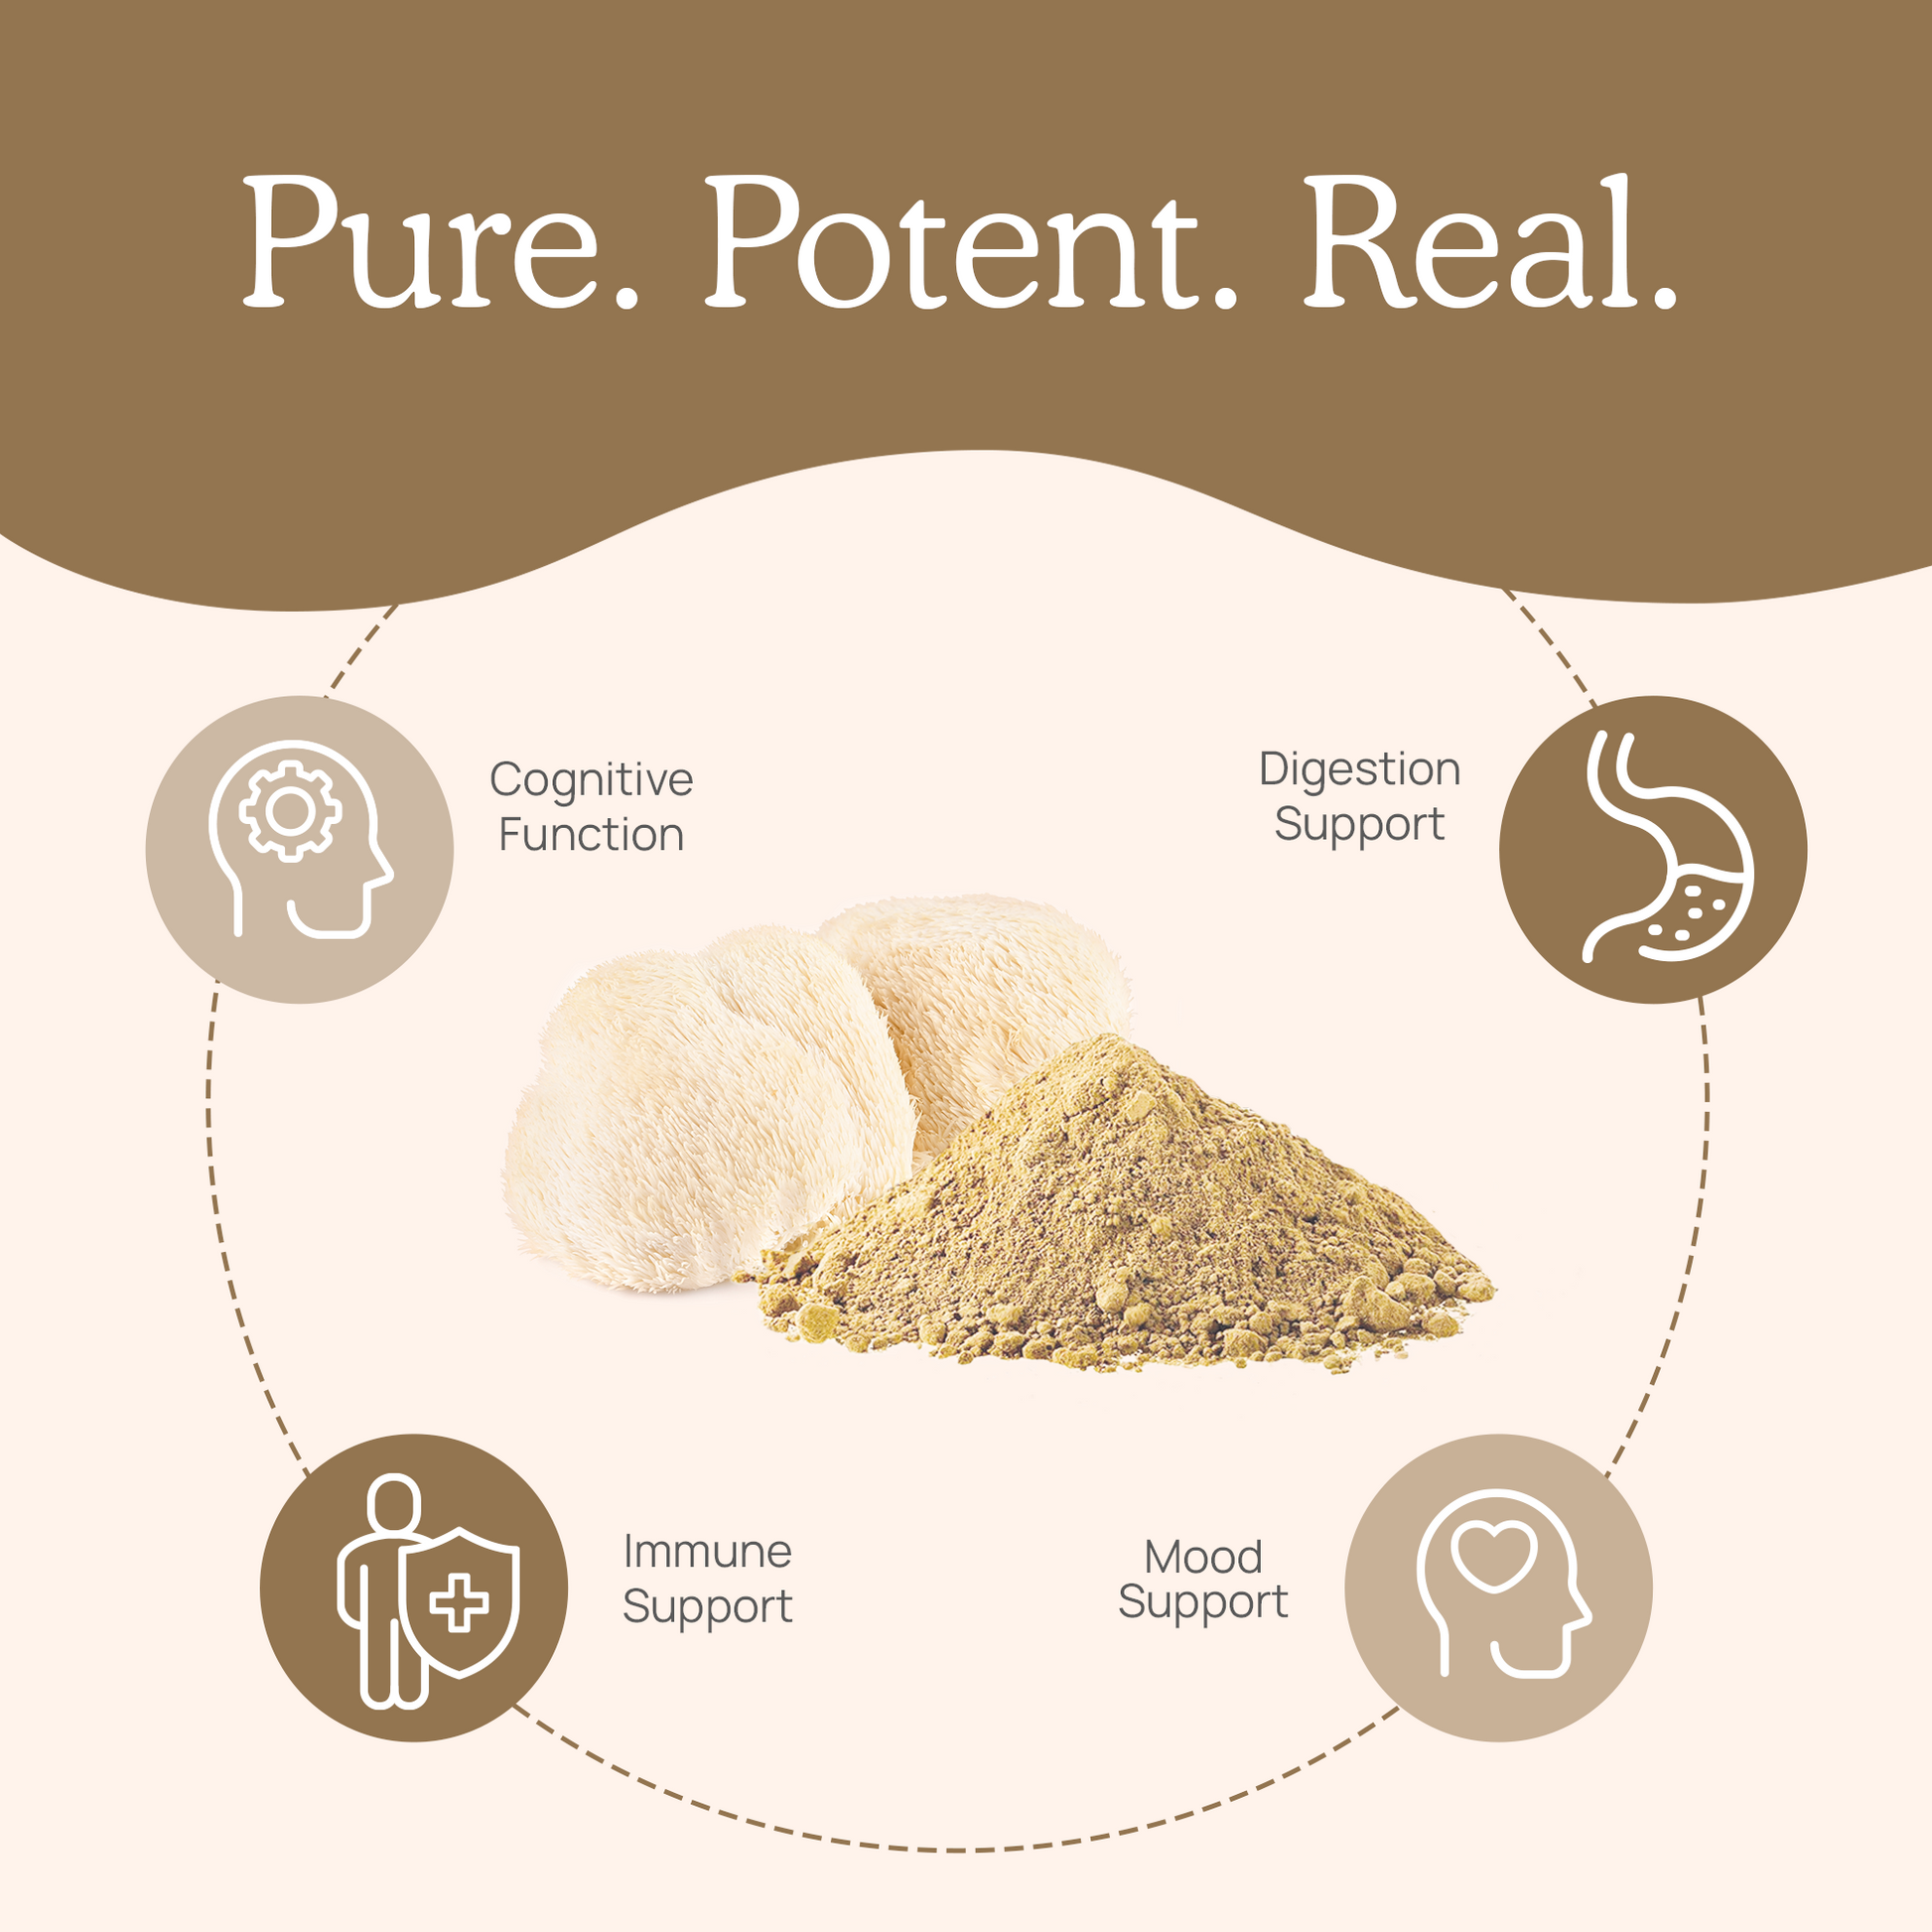 Pure potent real Organic Lions Mane Extract Capsules from Real Mushrooms.